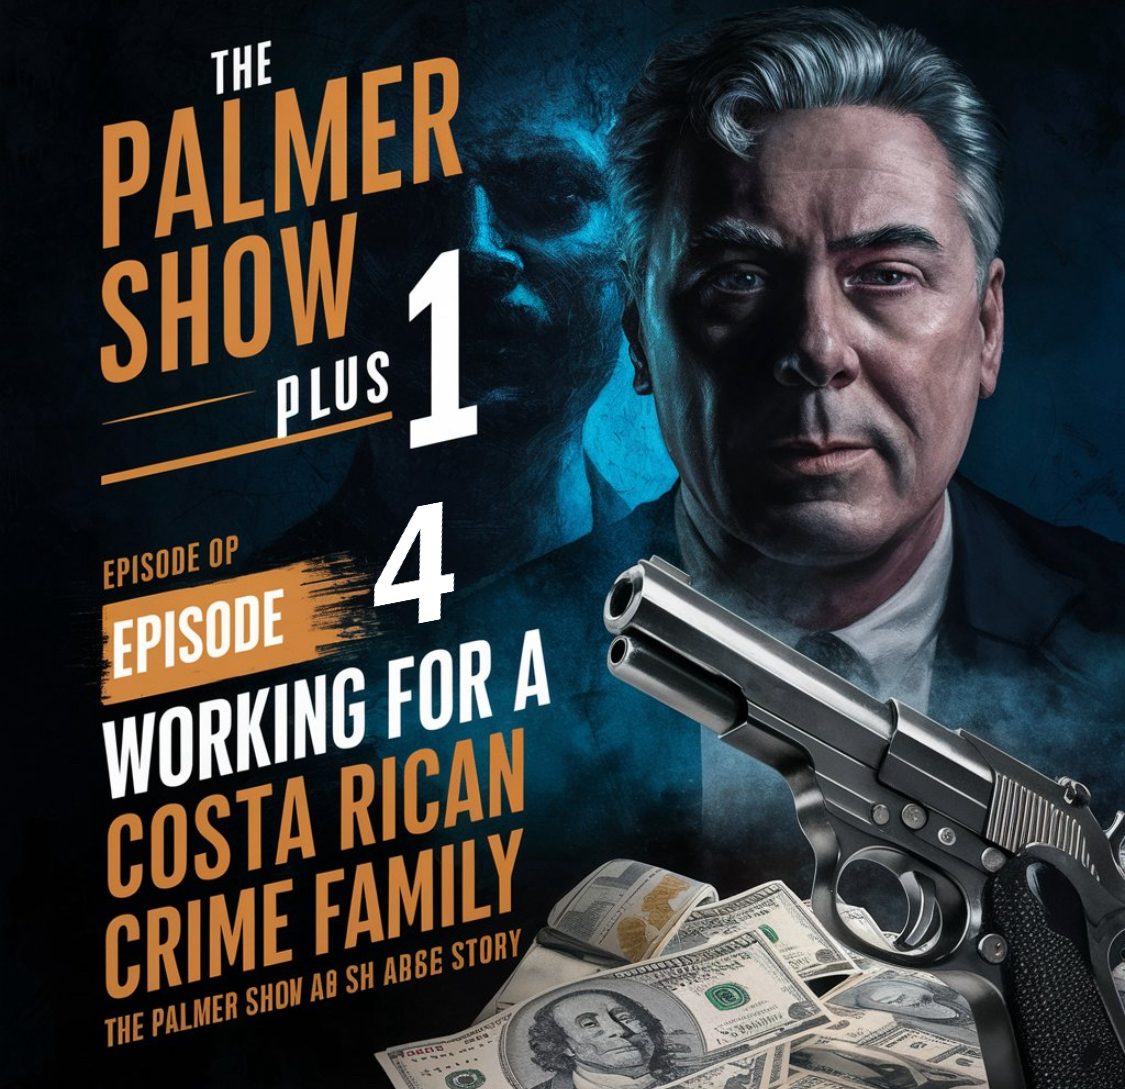 Episode 4 Working For A Costa Rican Crime Family